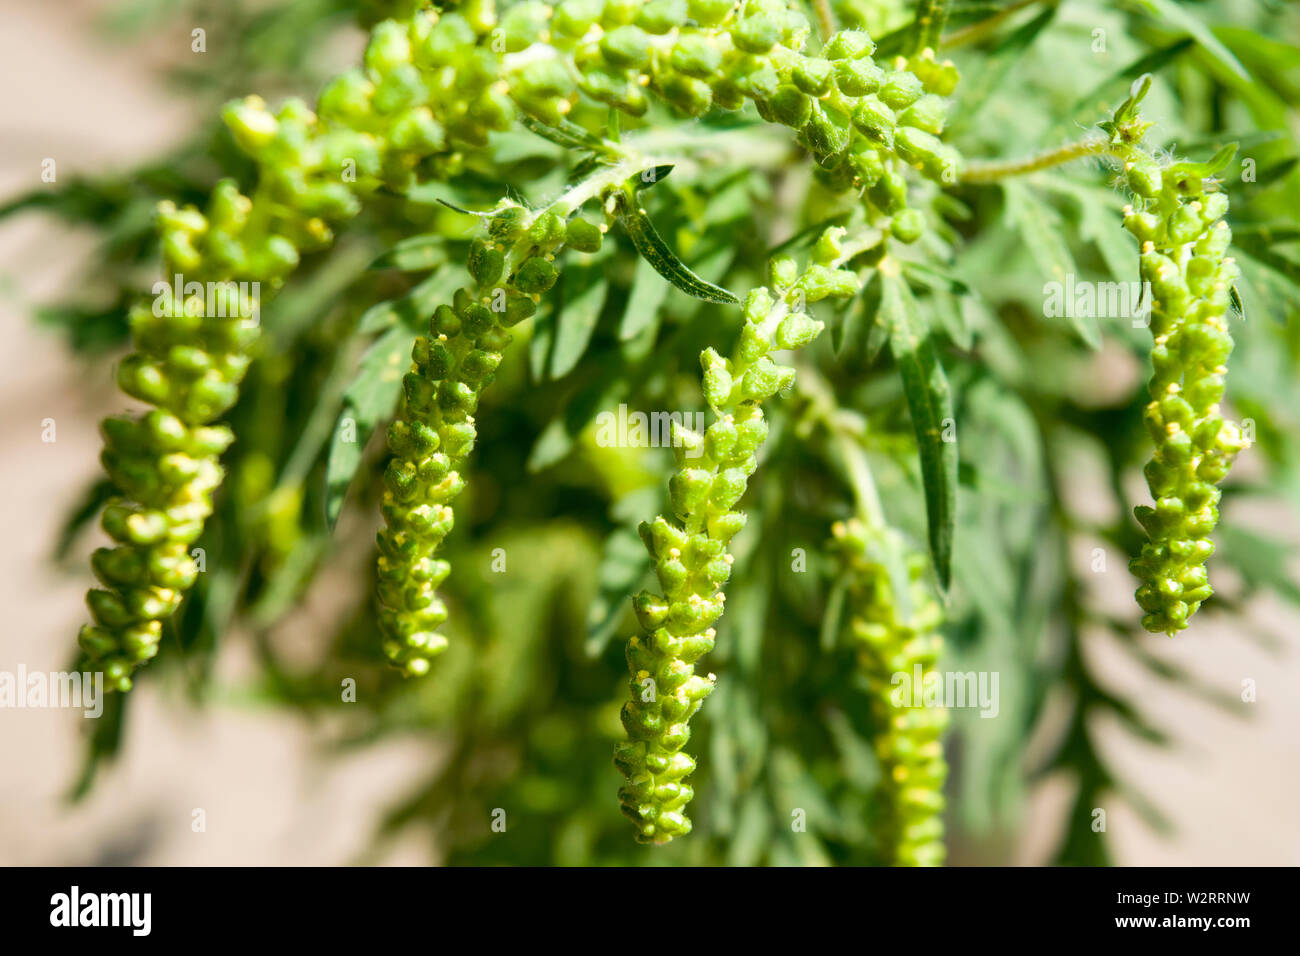 Ragweed pollen is notorious for causing allergic reactions in humans, specifically allergic rhinitis. Stock Photo